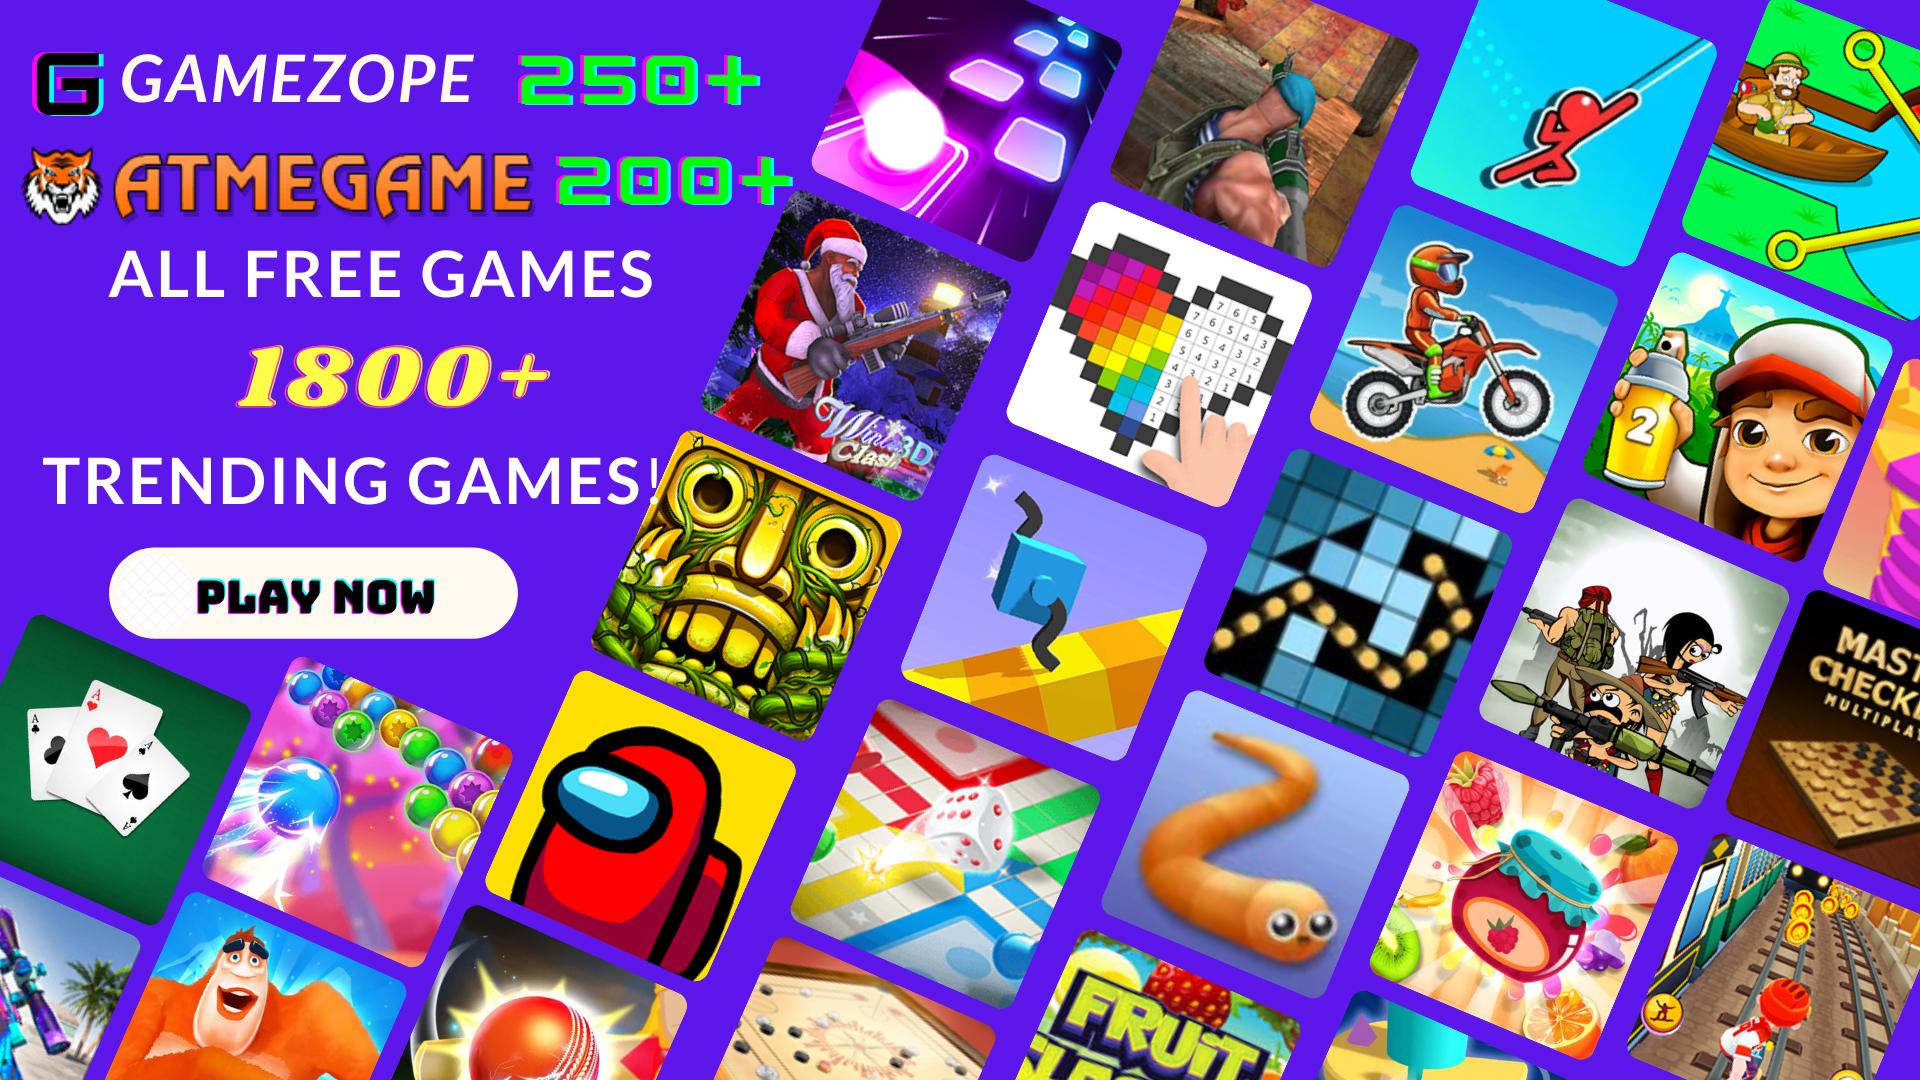 New Games, All Games, Gamezop Pro, All in one Game 1.1.7 Screenshot 6